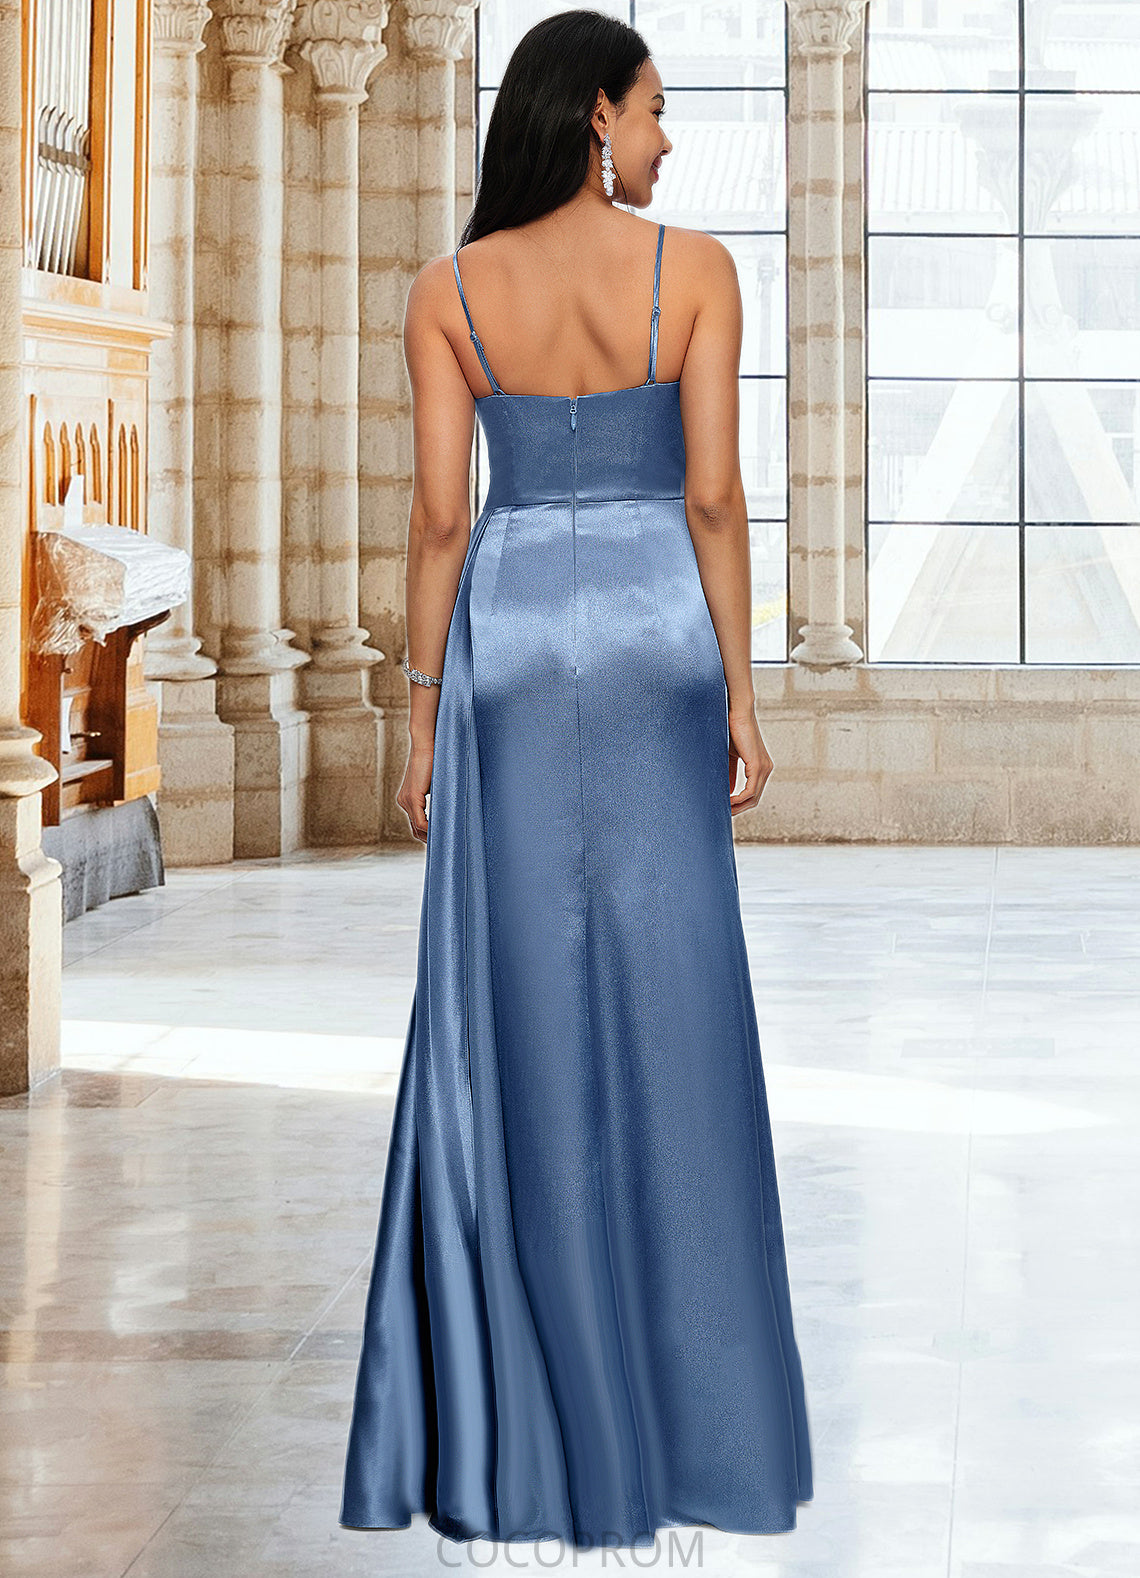 Rose Sheath/Column V-Neck Floor-Length Stretch Satin Prom Dresses With Pleated DBP0022214